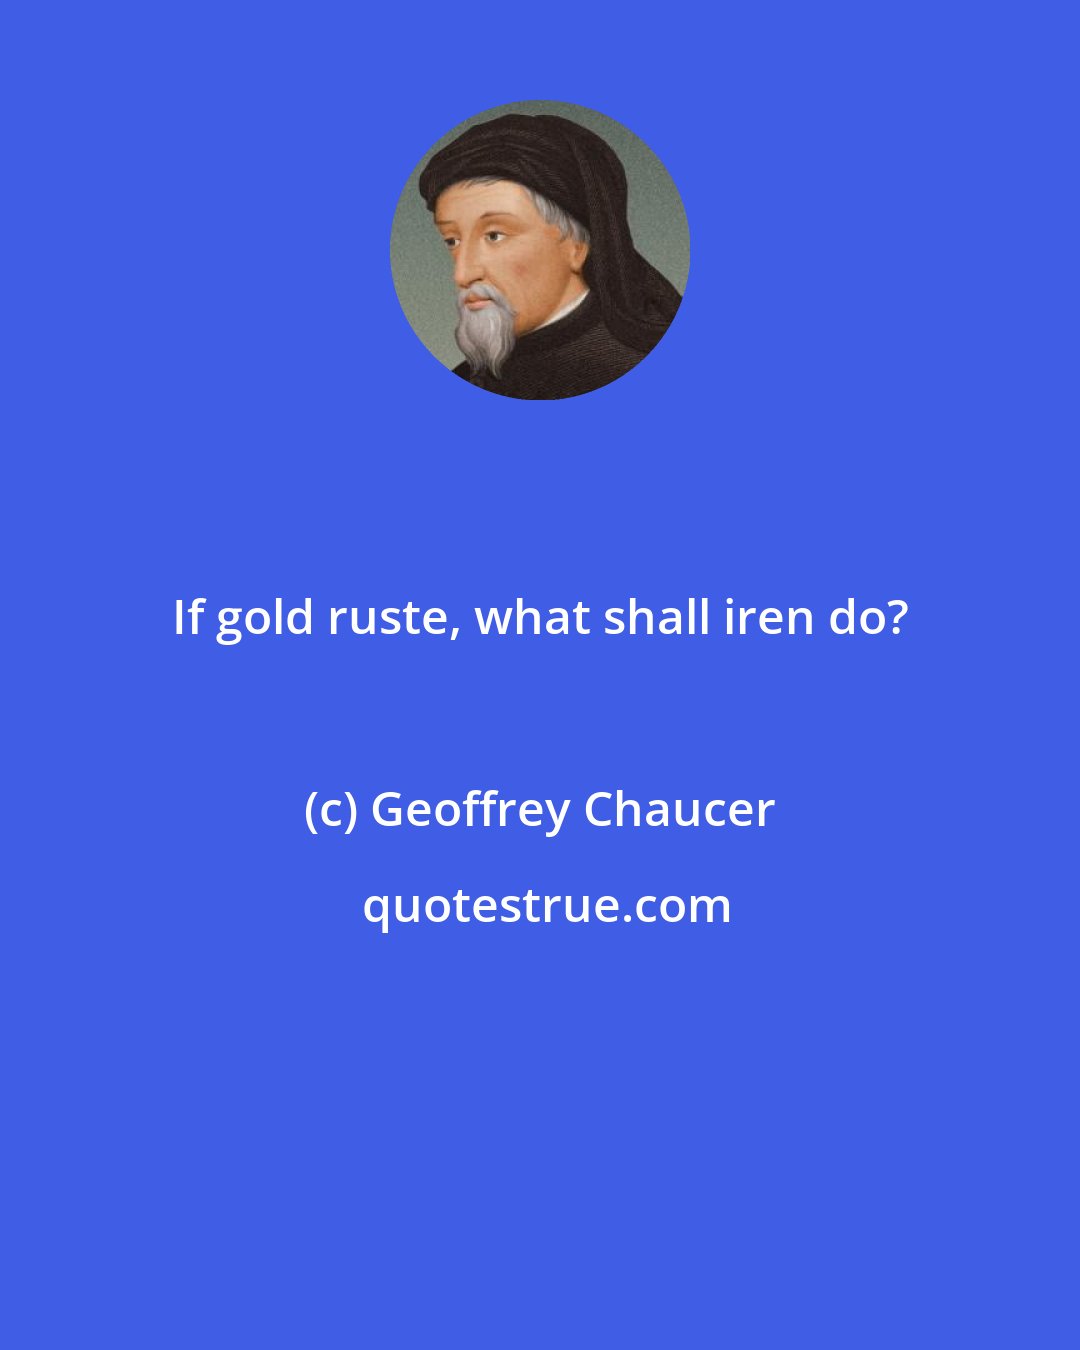 Geoffrey Chaucer: If gold ruste, what shall iren do?